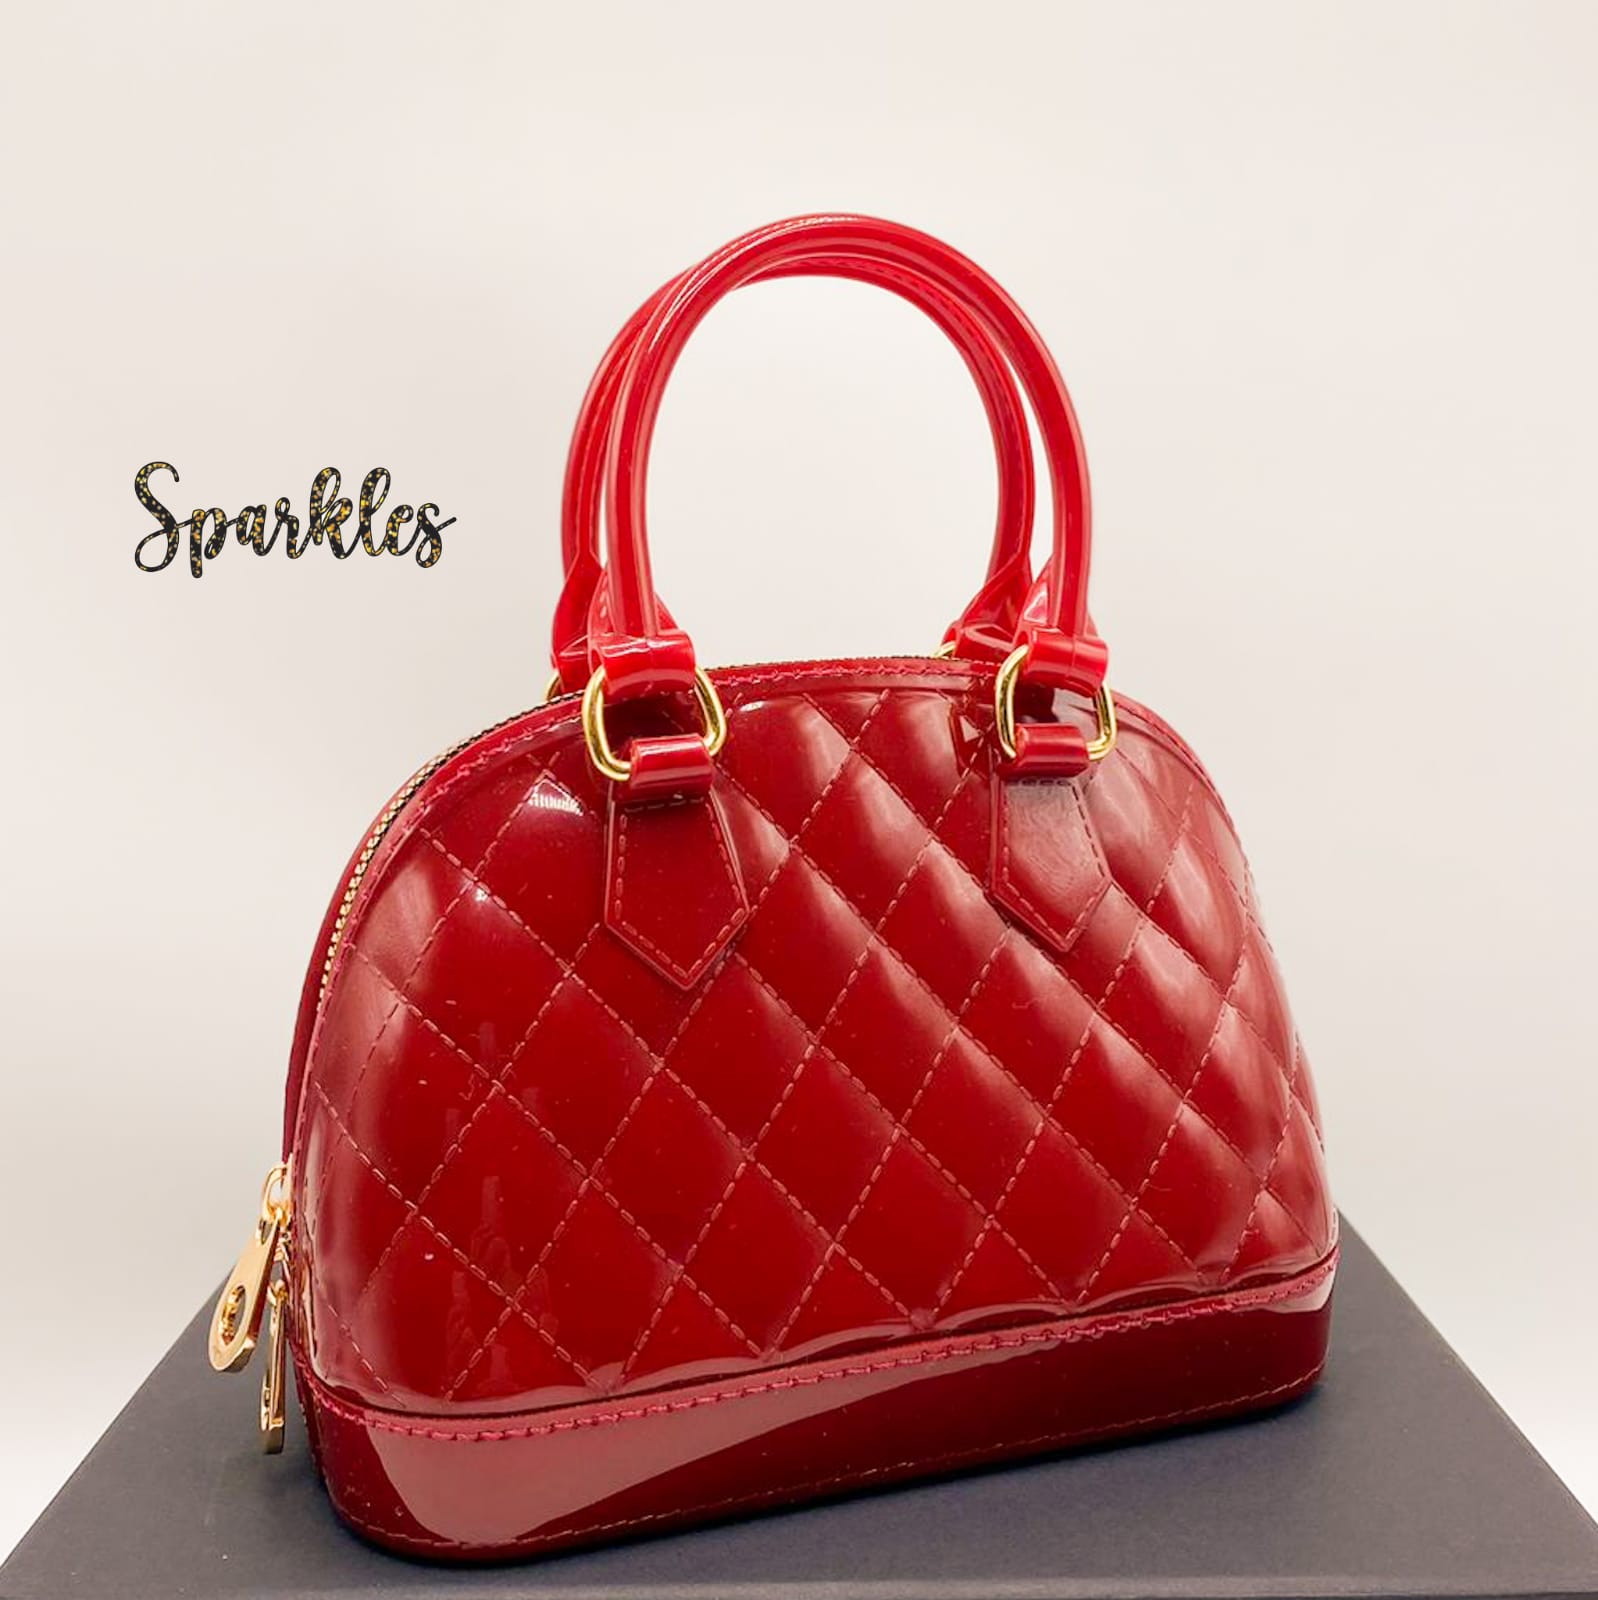 EXQUISITE QUILTED BAG